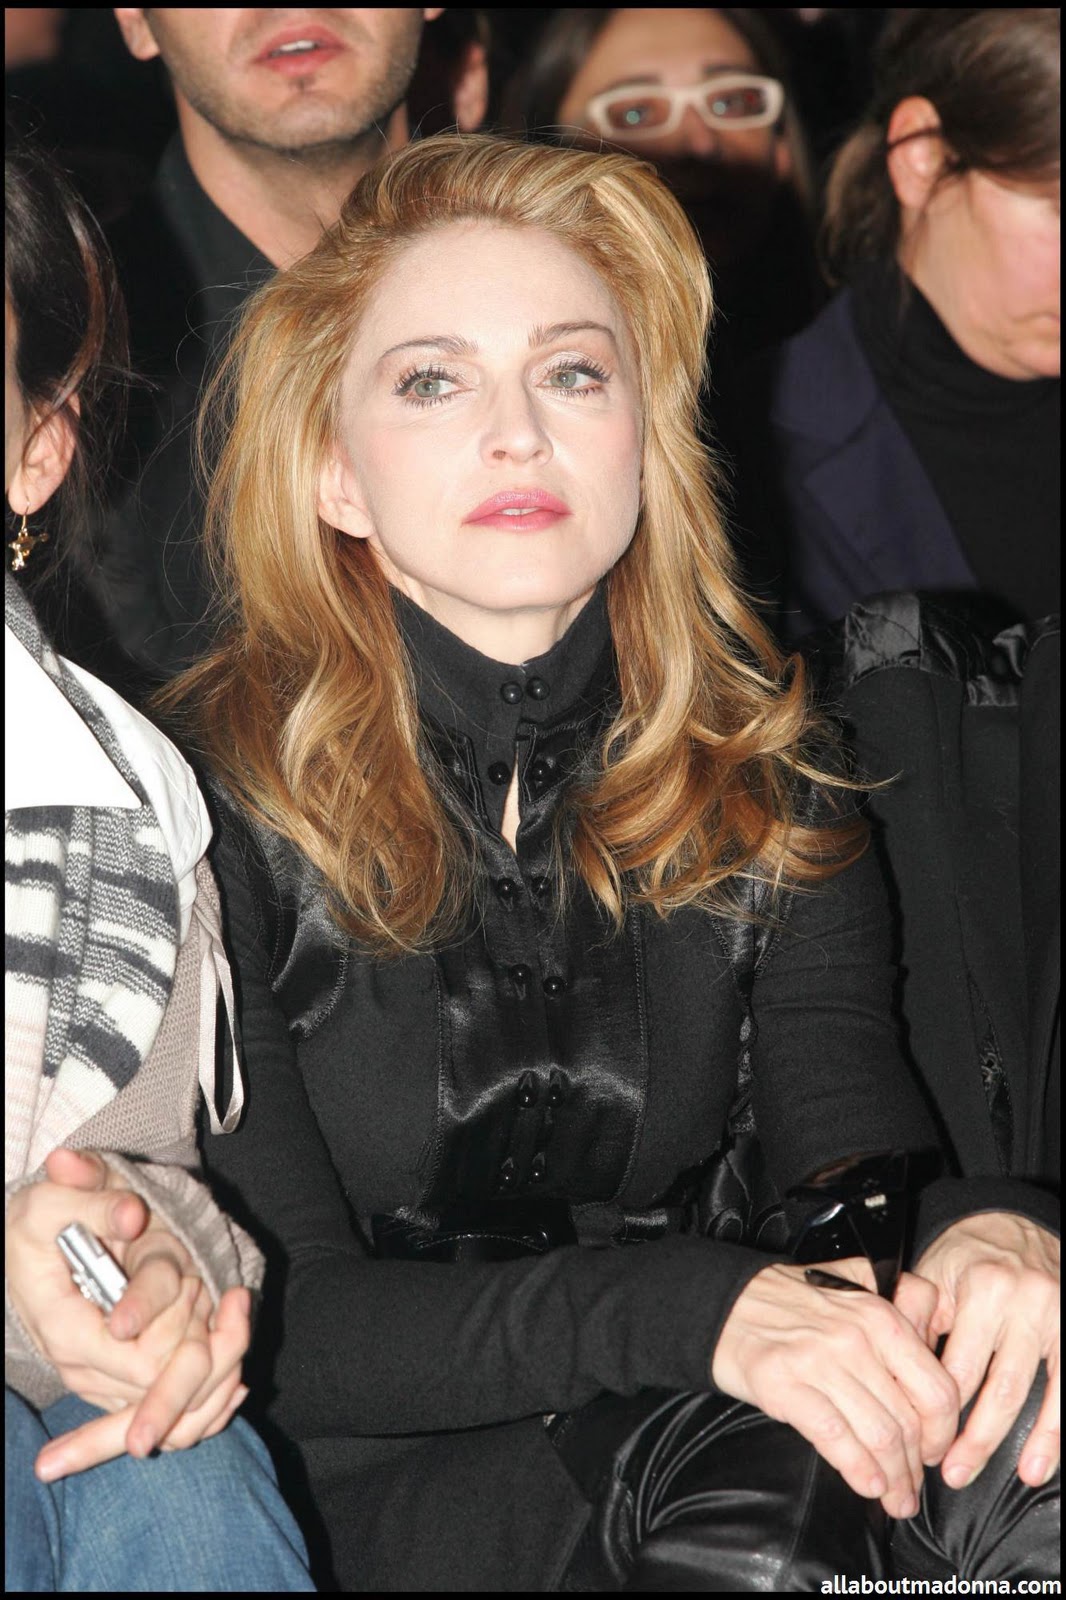 Photos-Of-The-Day-Madonna-at-Jean-Paul-Gaultier-Fashion-show-in-Paris-madonna-12805783-1333-2000.jpg